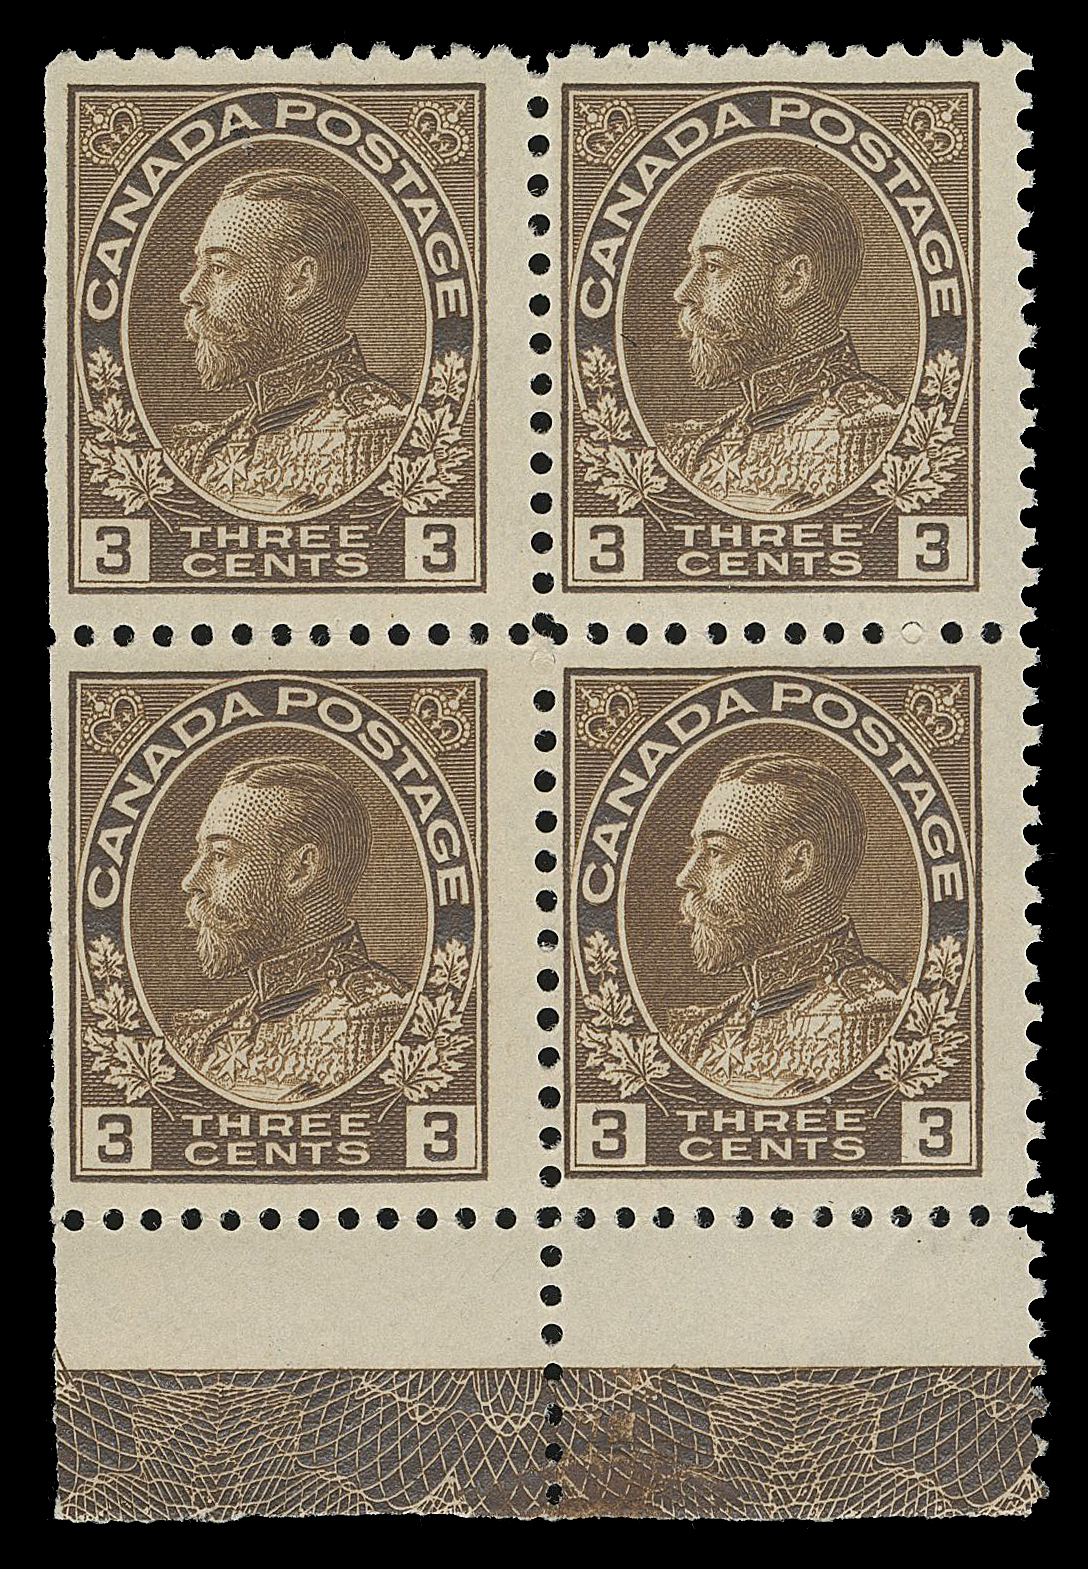 ADMIRAL STAMPS  108,Two post office fresh mint blocks with remarkably strong, complete Type D upright and inverted lathework, latter with natural straight edge at left, both with full pristine original gum, Fine NH